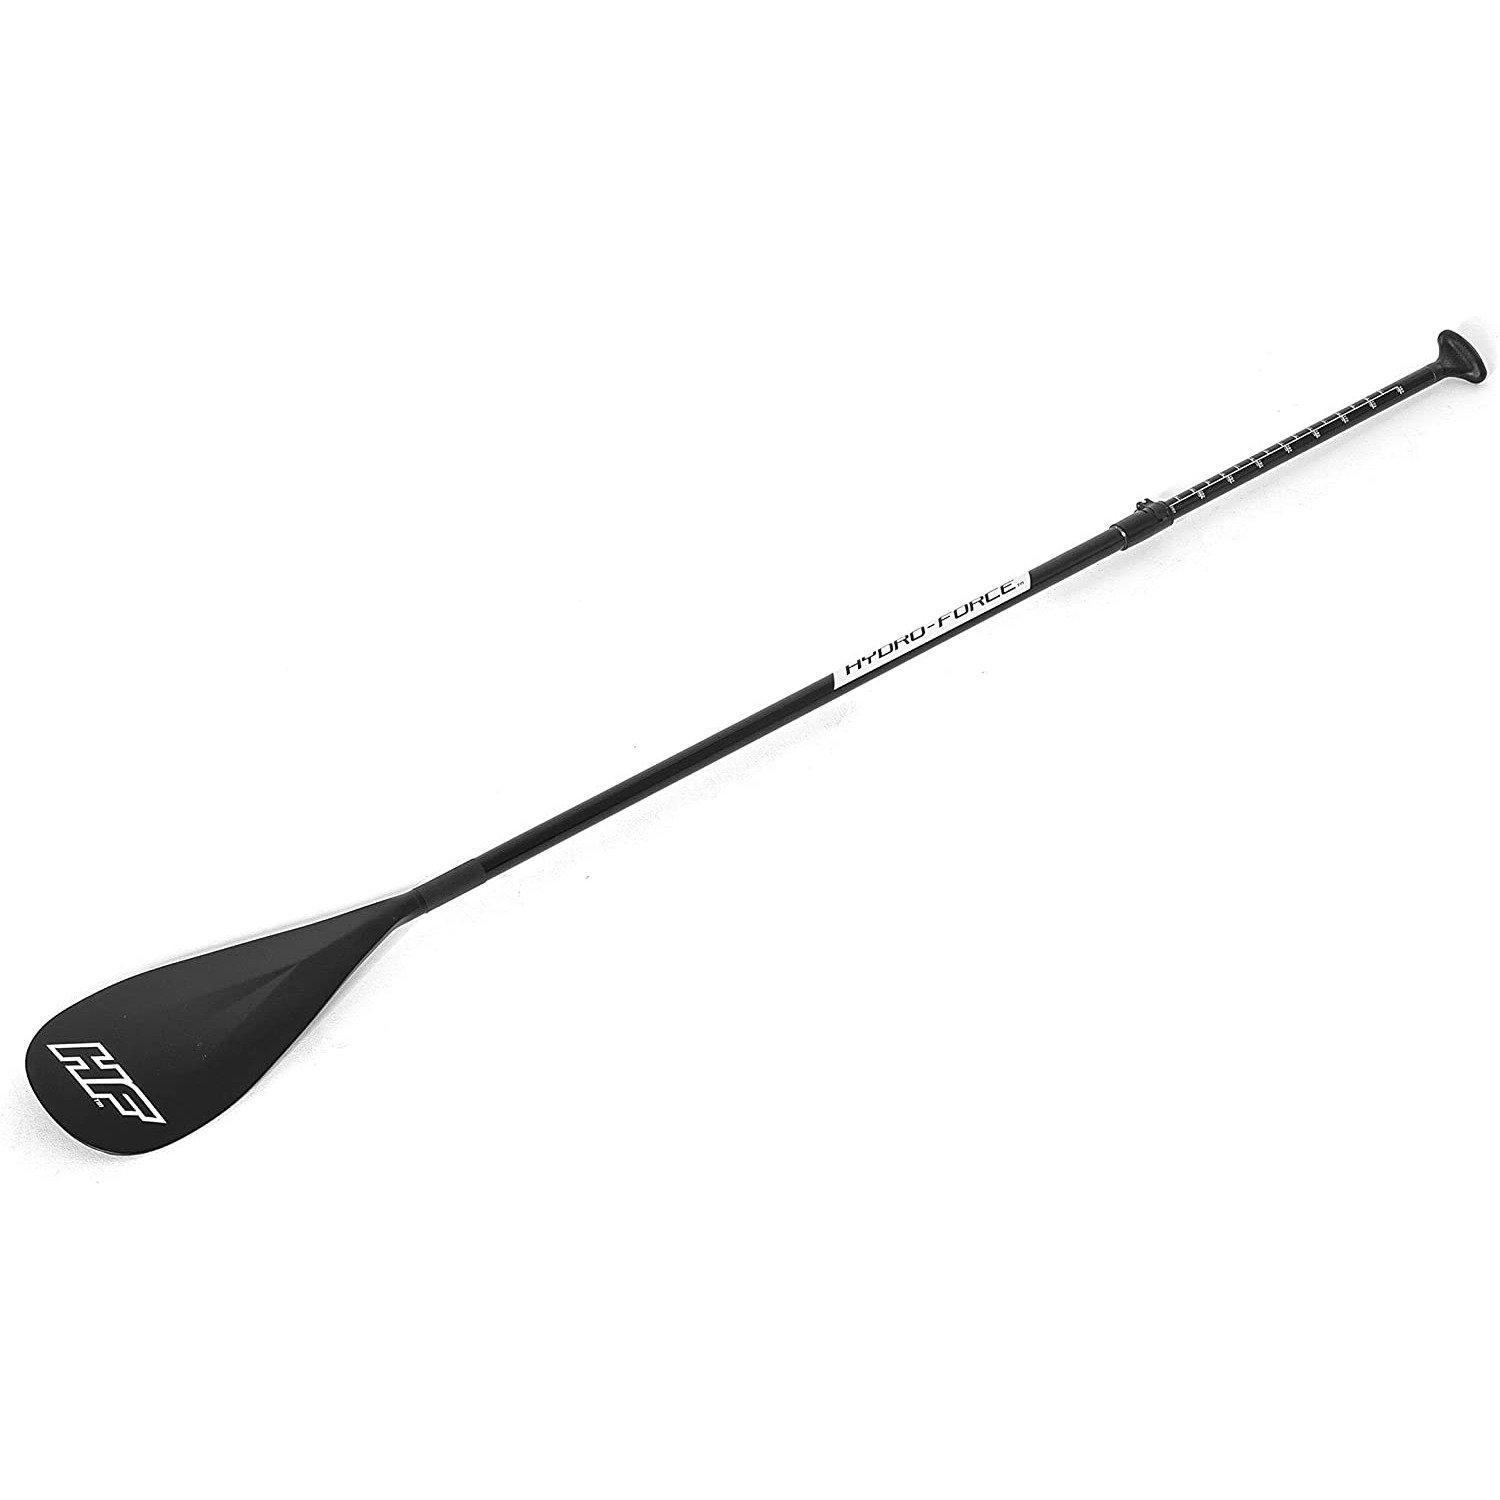 Fibreglass Stand Up Paddleboard SUP Paddle, Black, 85 Inch